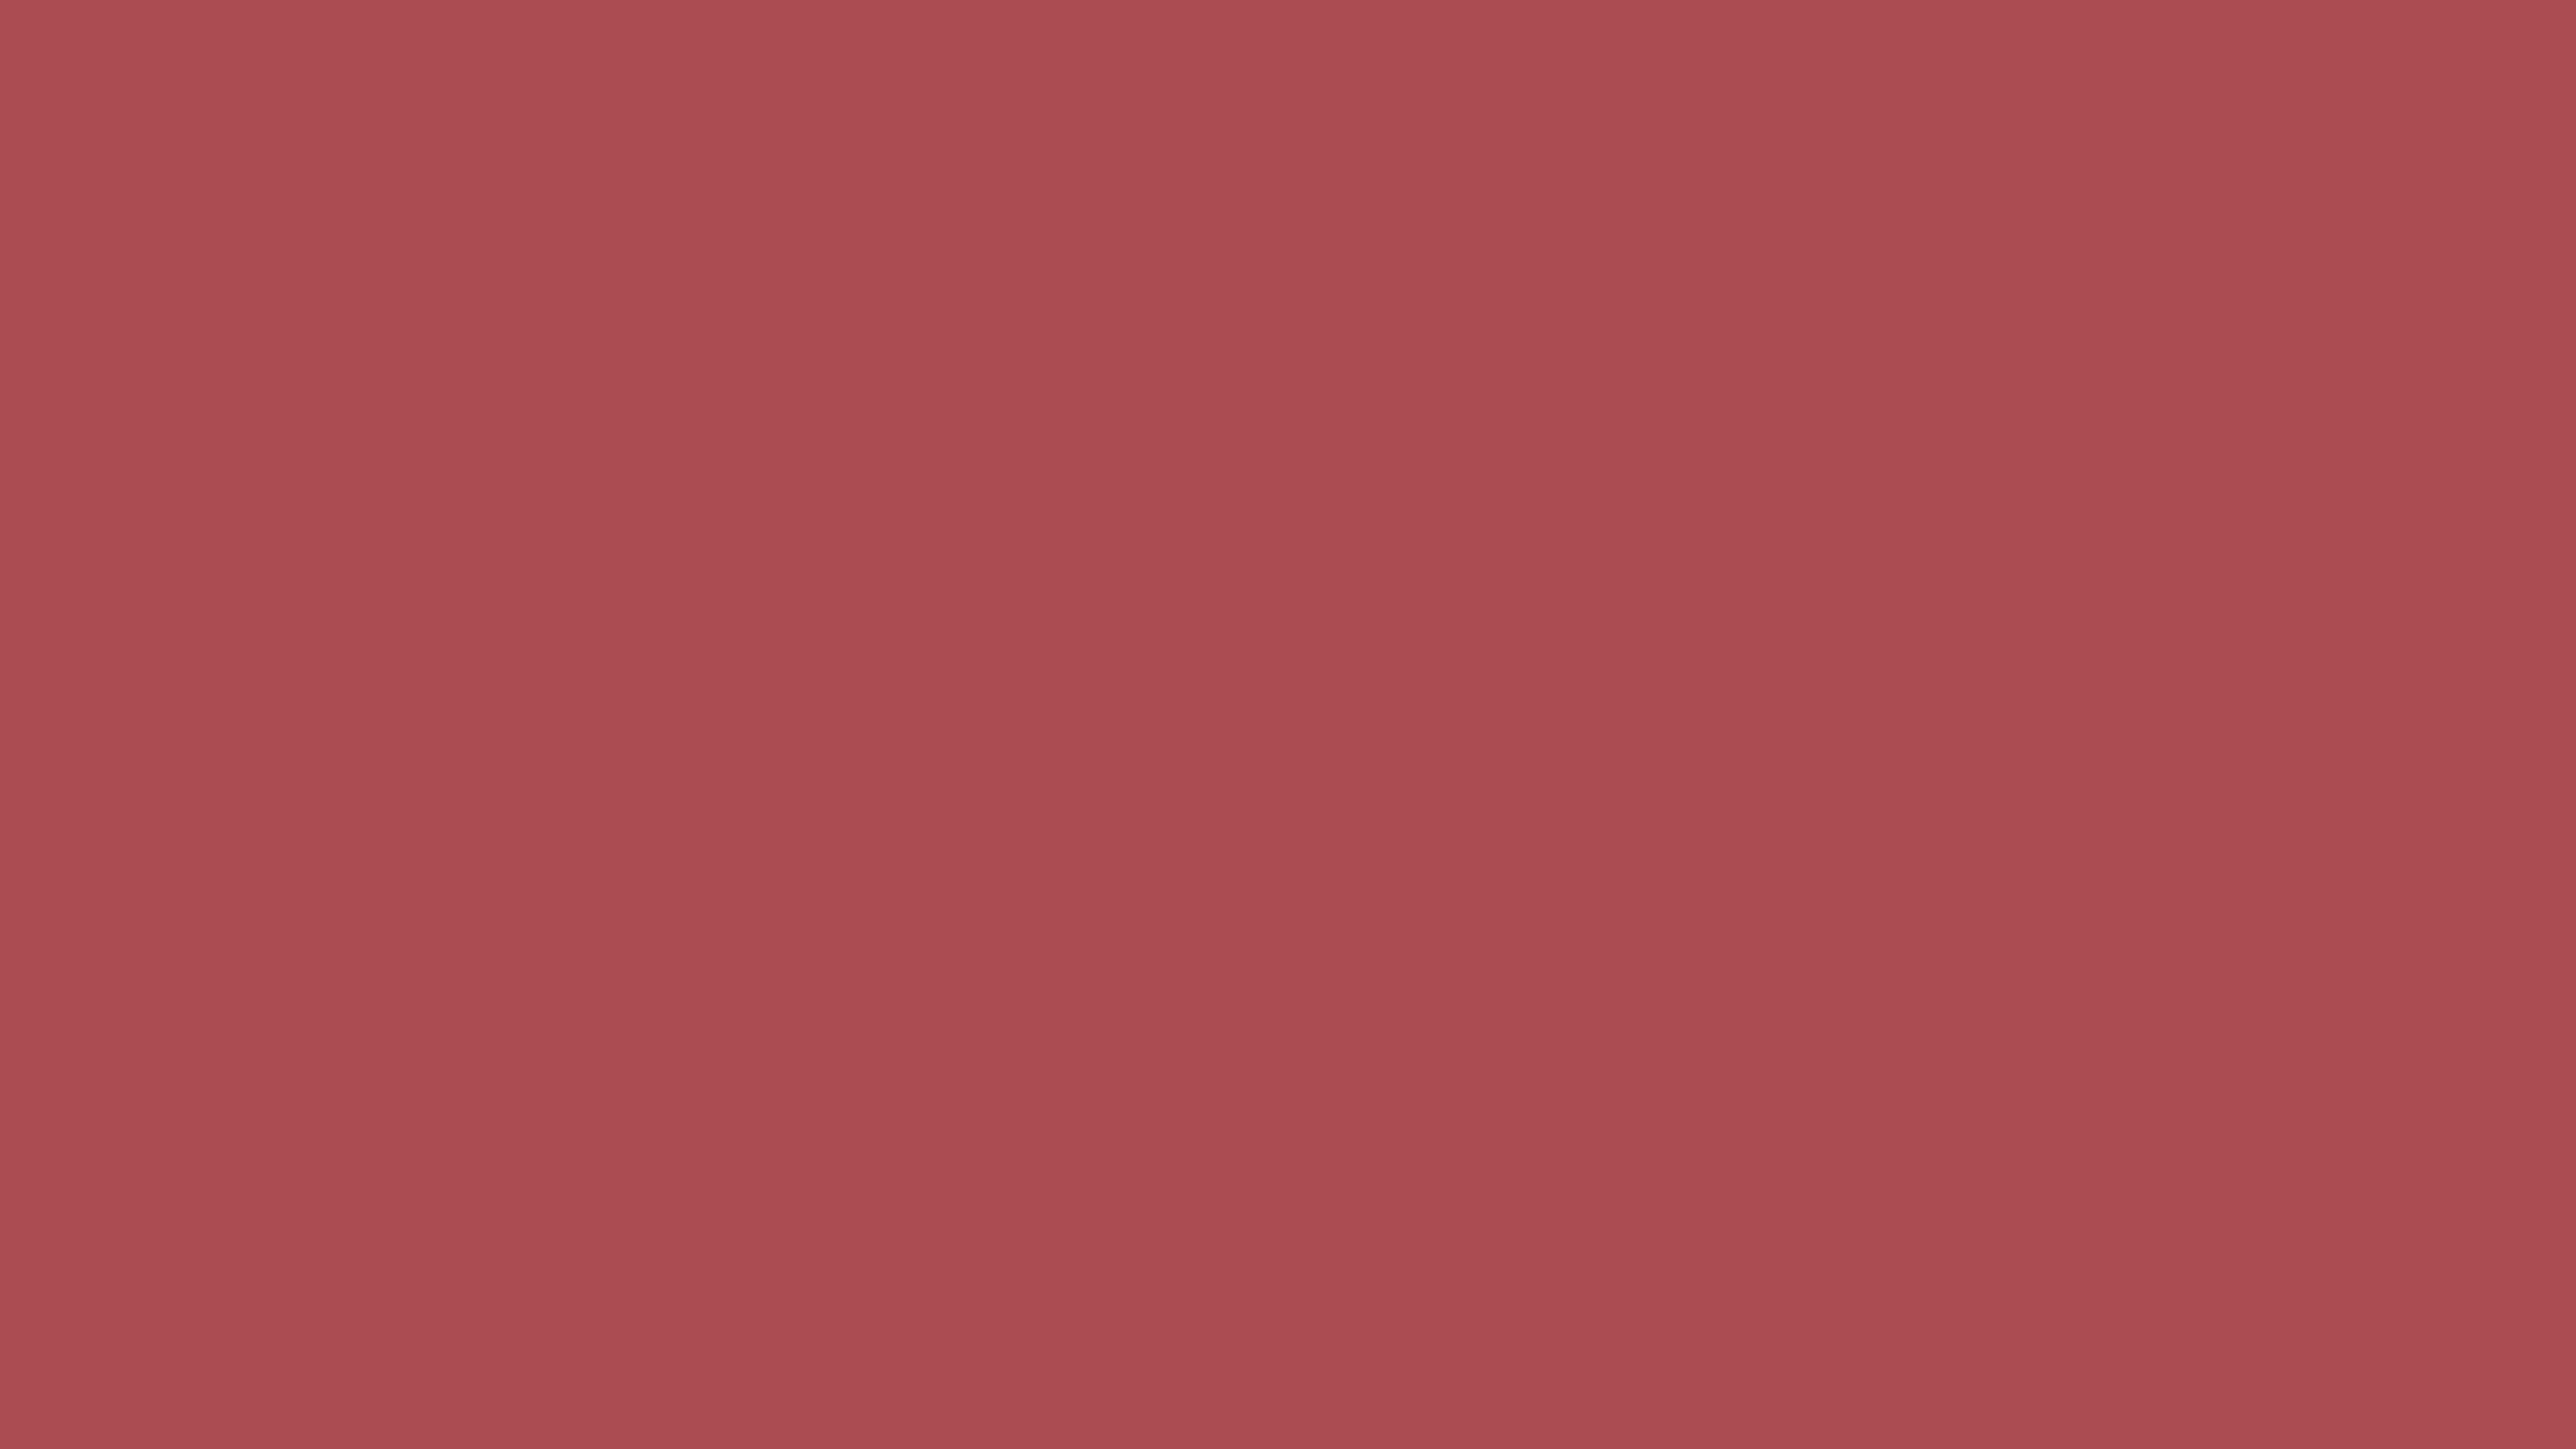 7680x4320 English Red Solid Color Background